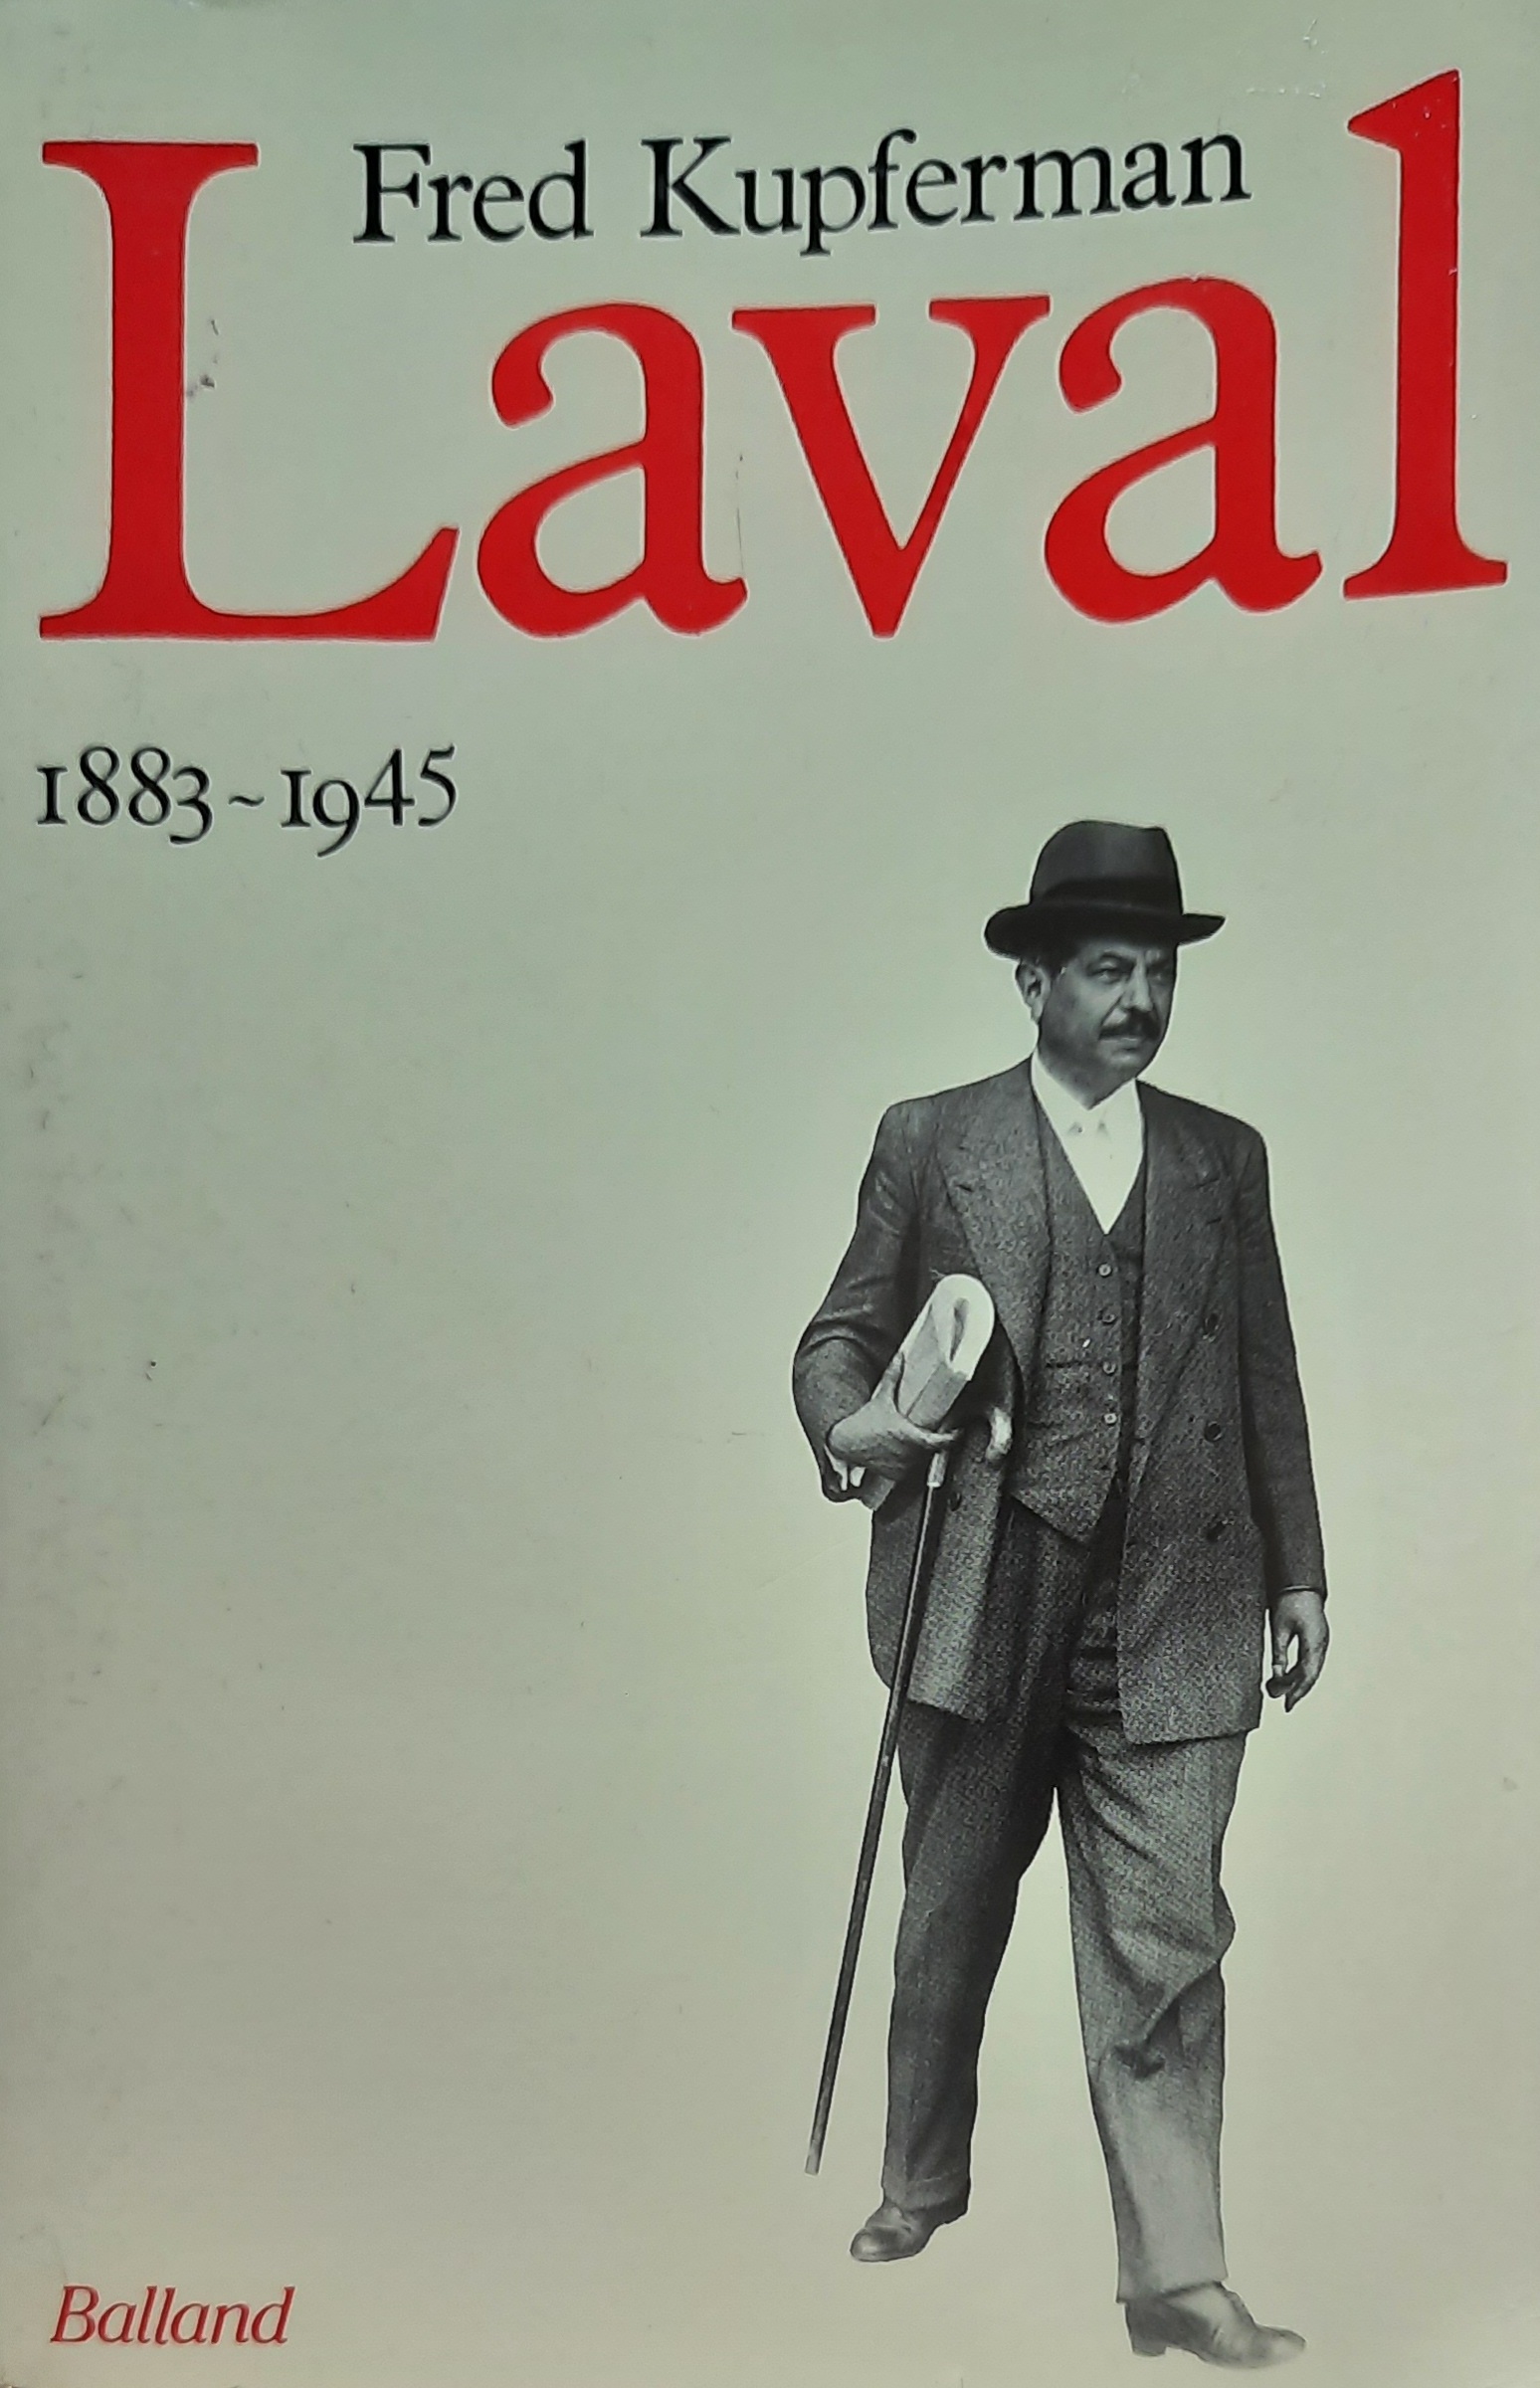 Book cover 202107142244: KUPFERMAN Fred | Laval 1883-1945 [Pierre Laval]